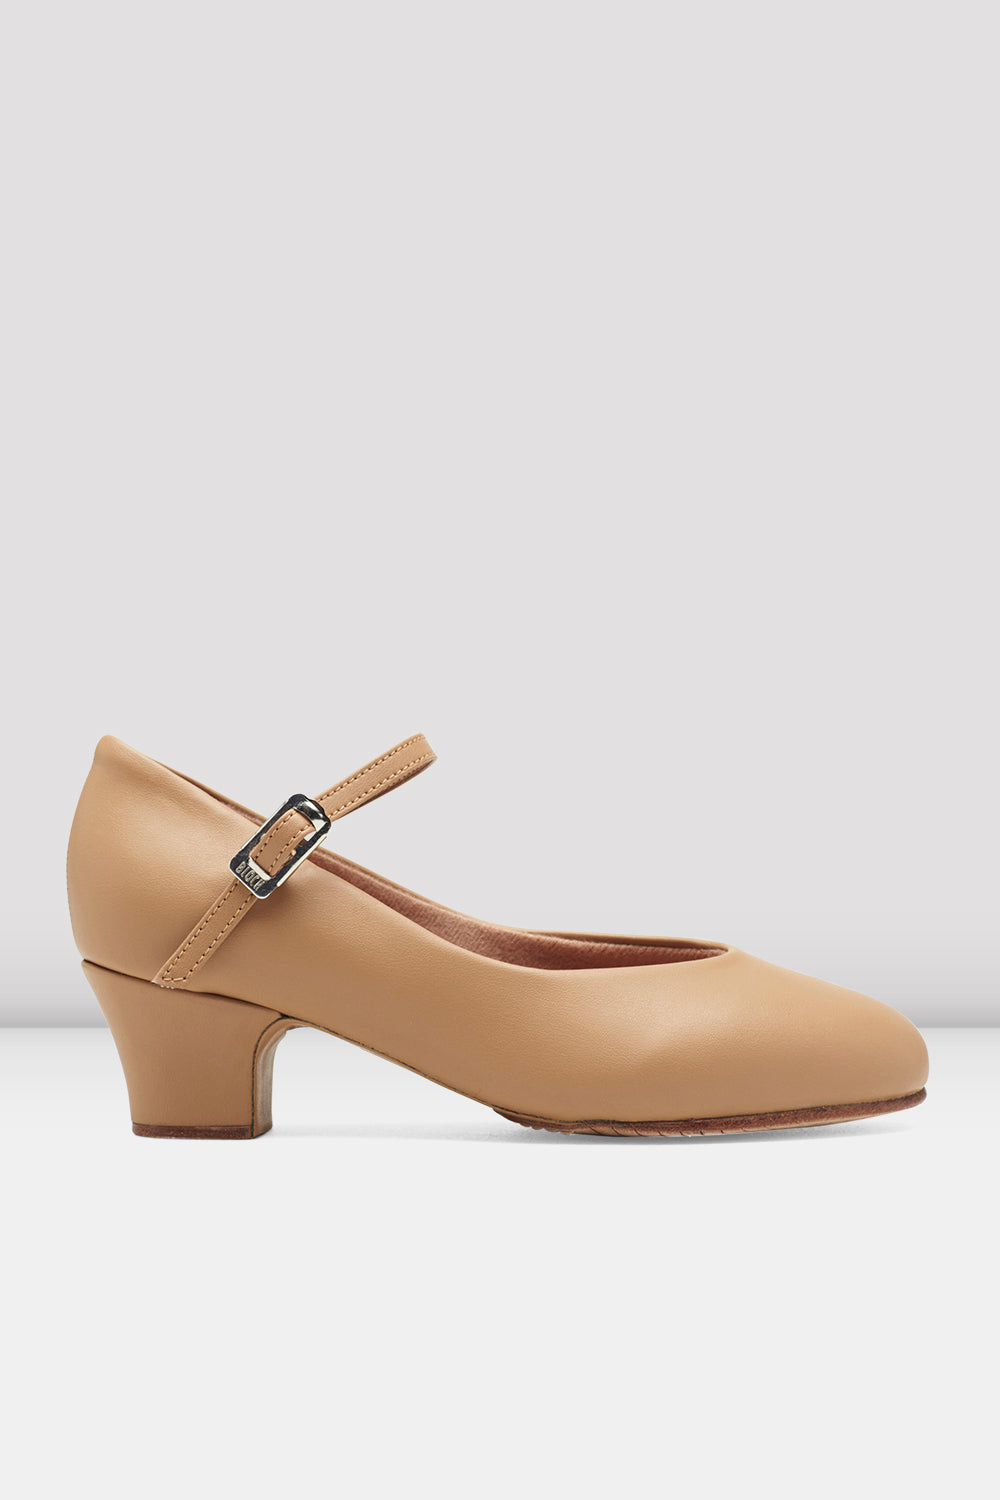 BLOCH Ladies Broadway-Lo Character Shoes, Tan Synthetic Leather